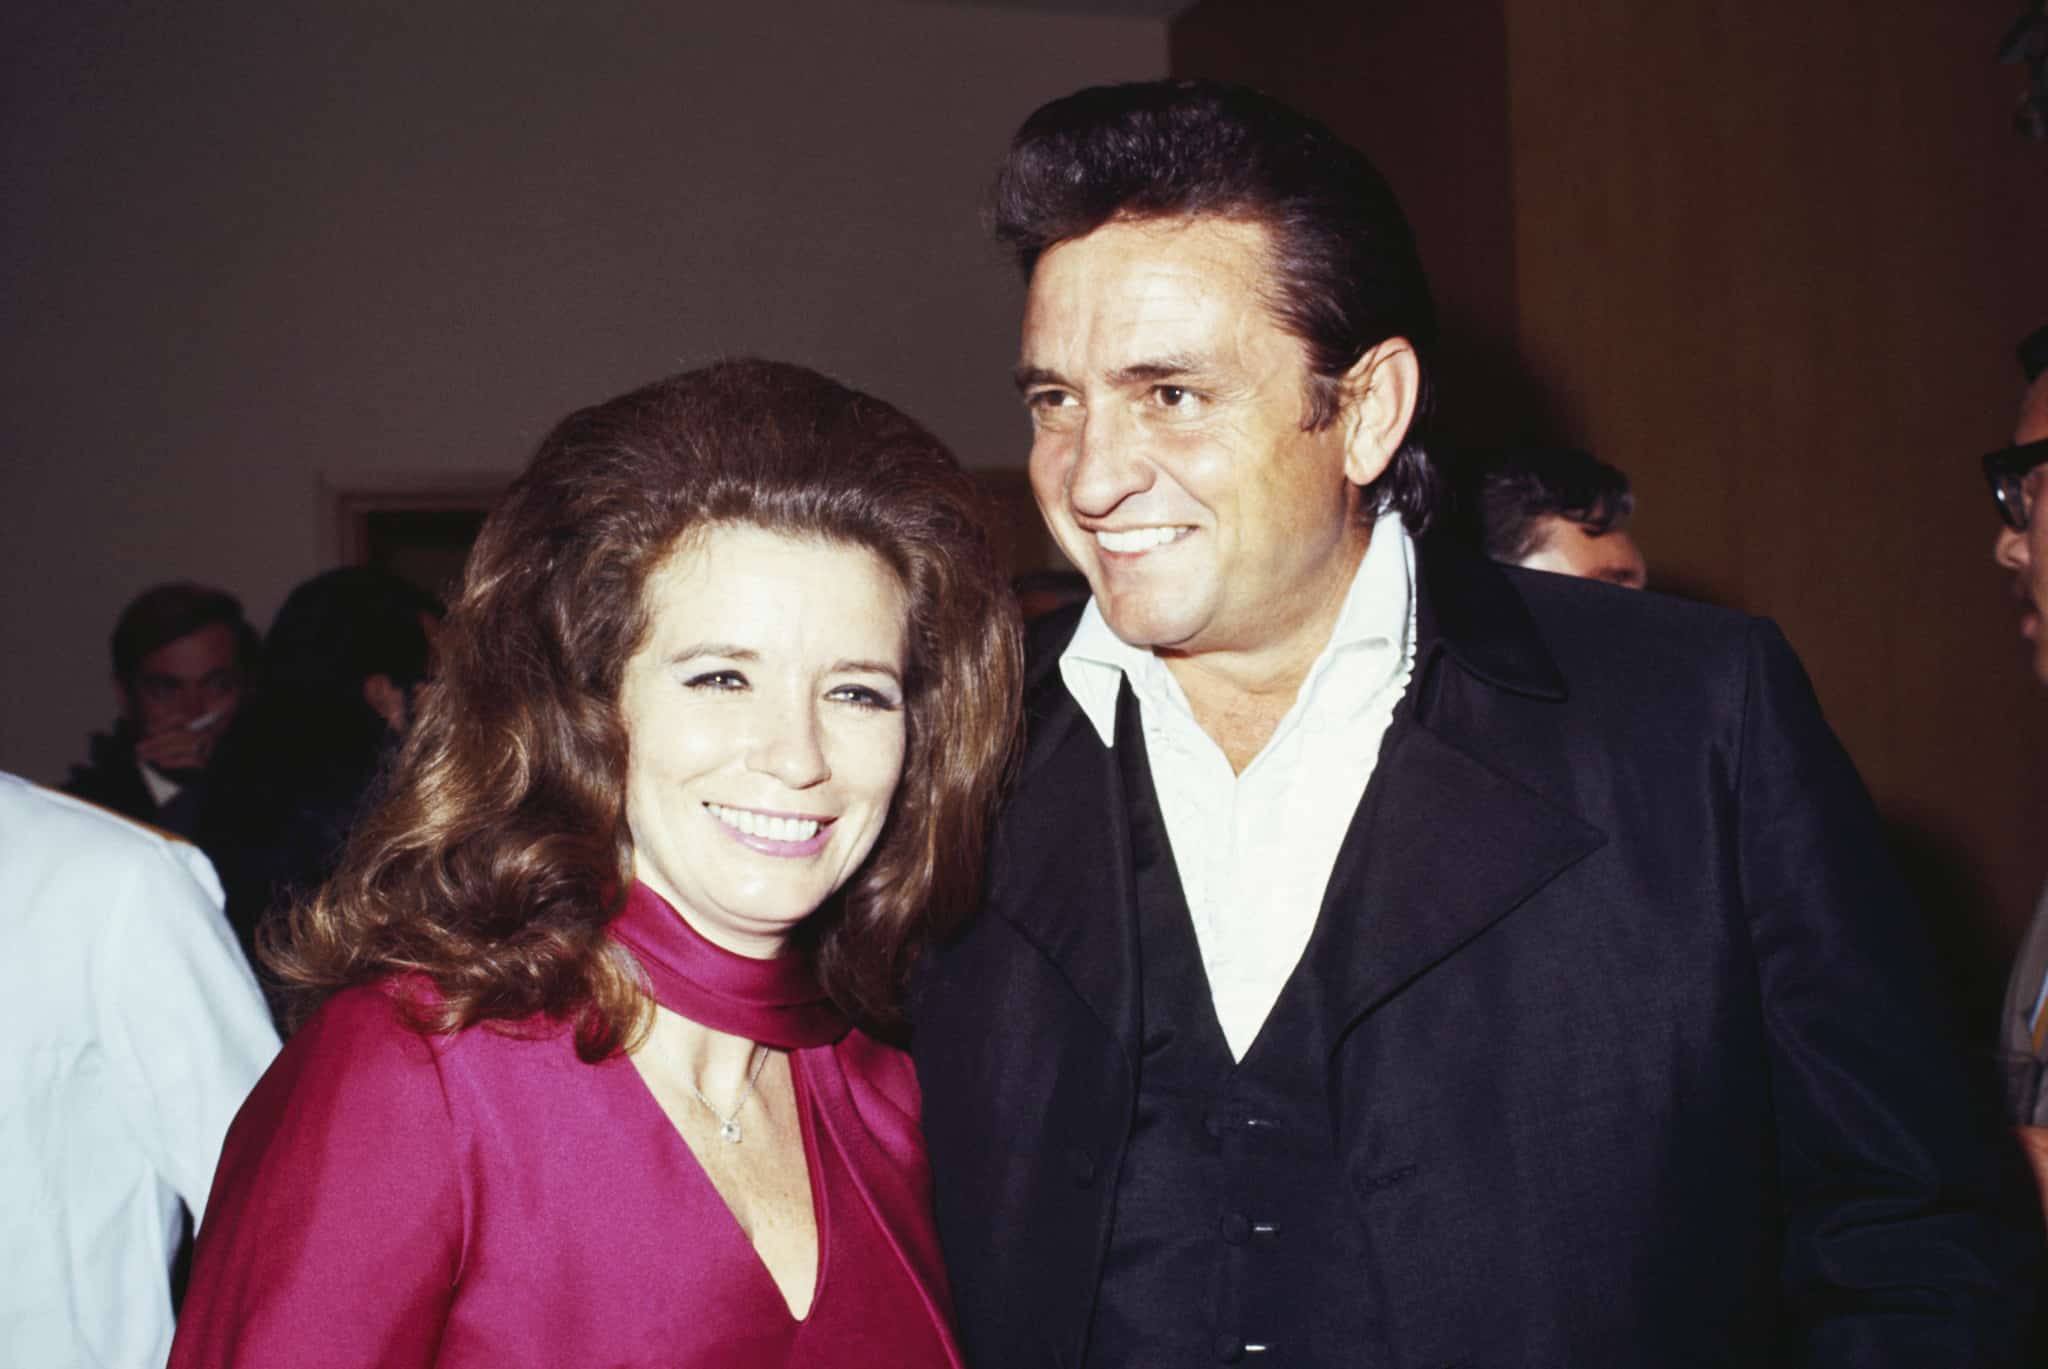 Johnny Cash proposed to June Carter on February 22, 1968